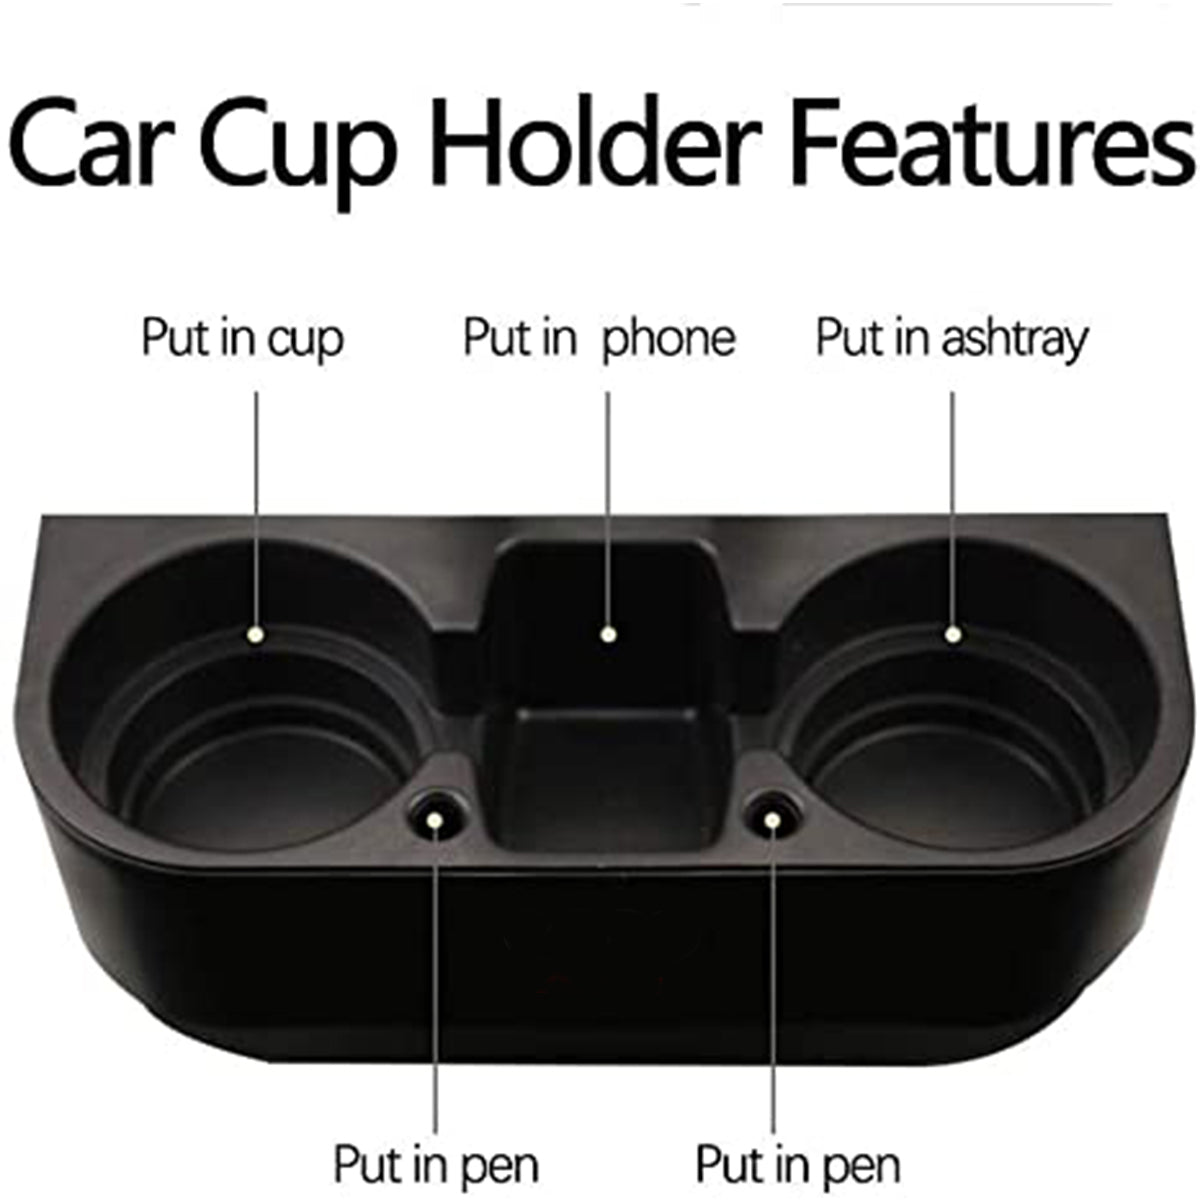 Delicate Leather Cup Holder Portable Multifunction Vehicle Seat Cup Cell Phone Drinks Holder Box Car Interior Organizer, Custom For Your Cars, Car Accessories LM11995